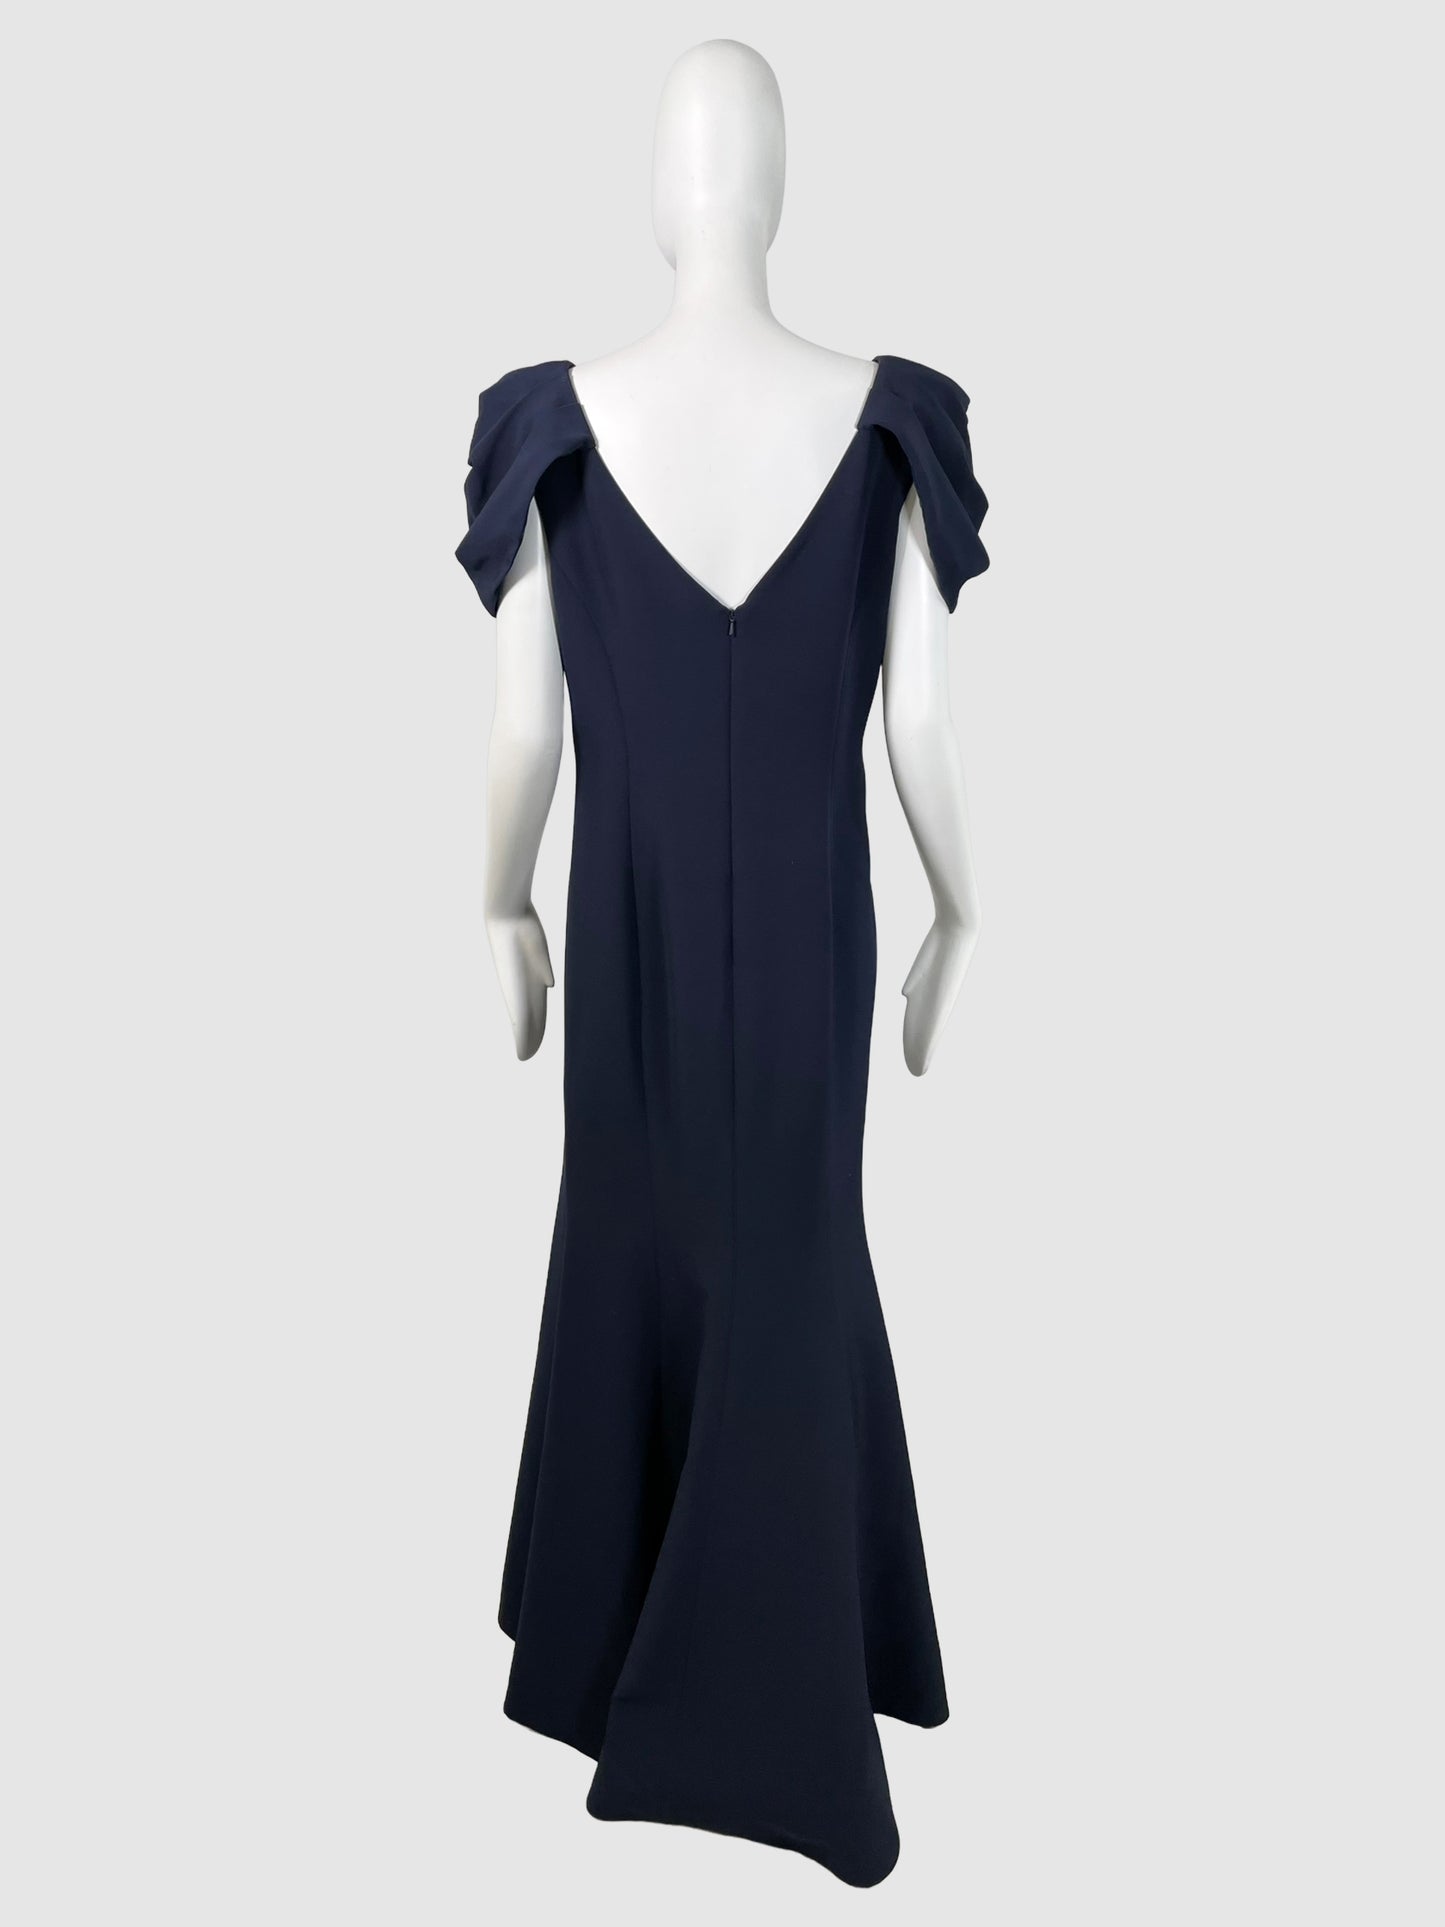 Alexander by Daymor Draped Gown - Size 12